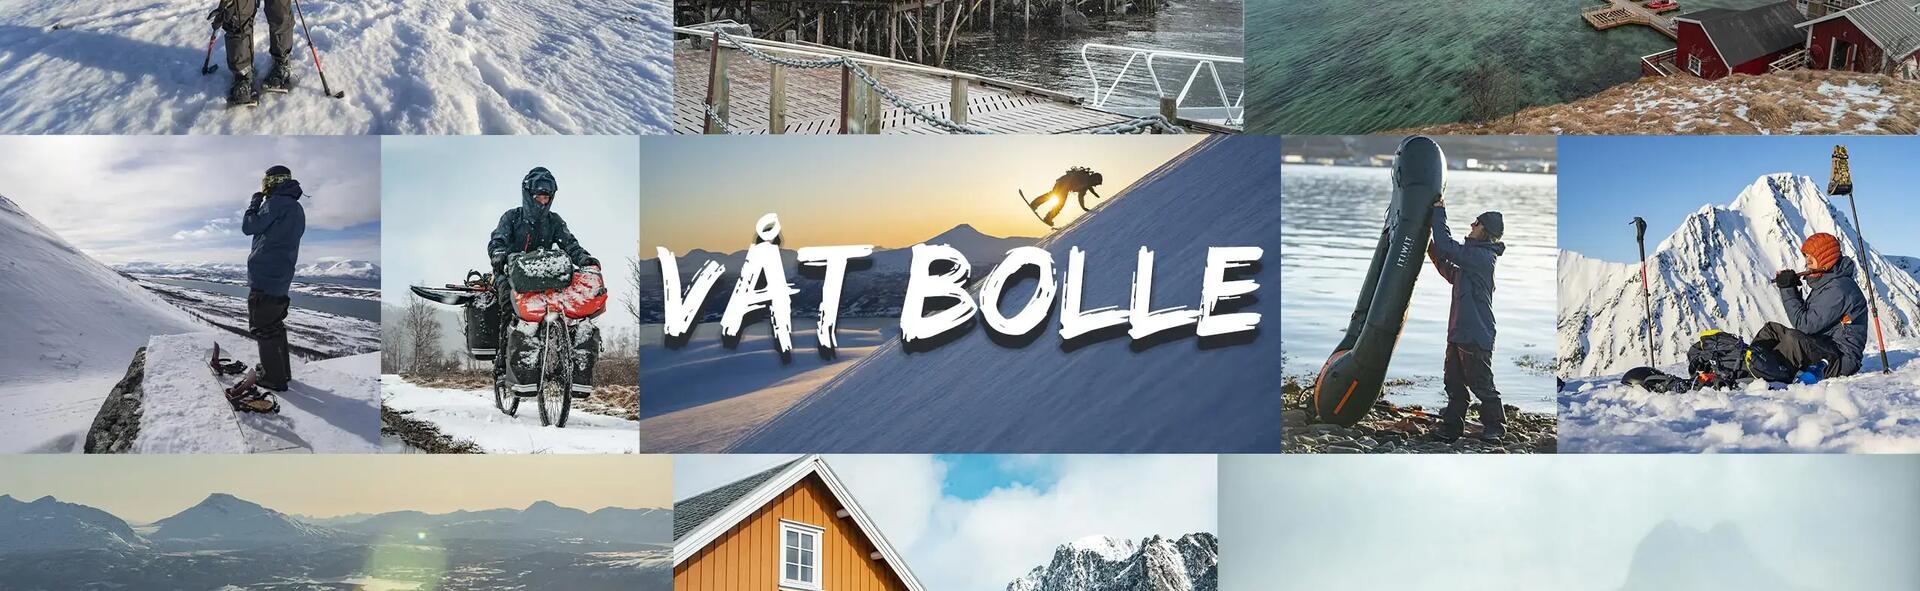 VAT BOLLE: An environmentally conscious cycling, packraft and snowboarding adventure film!